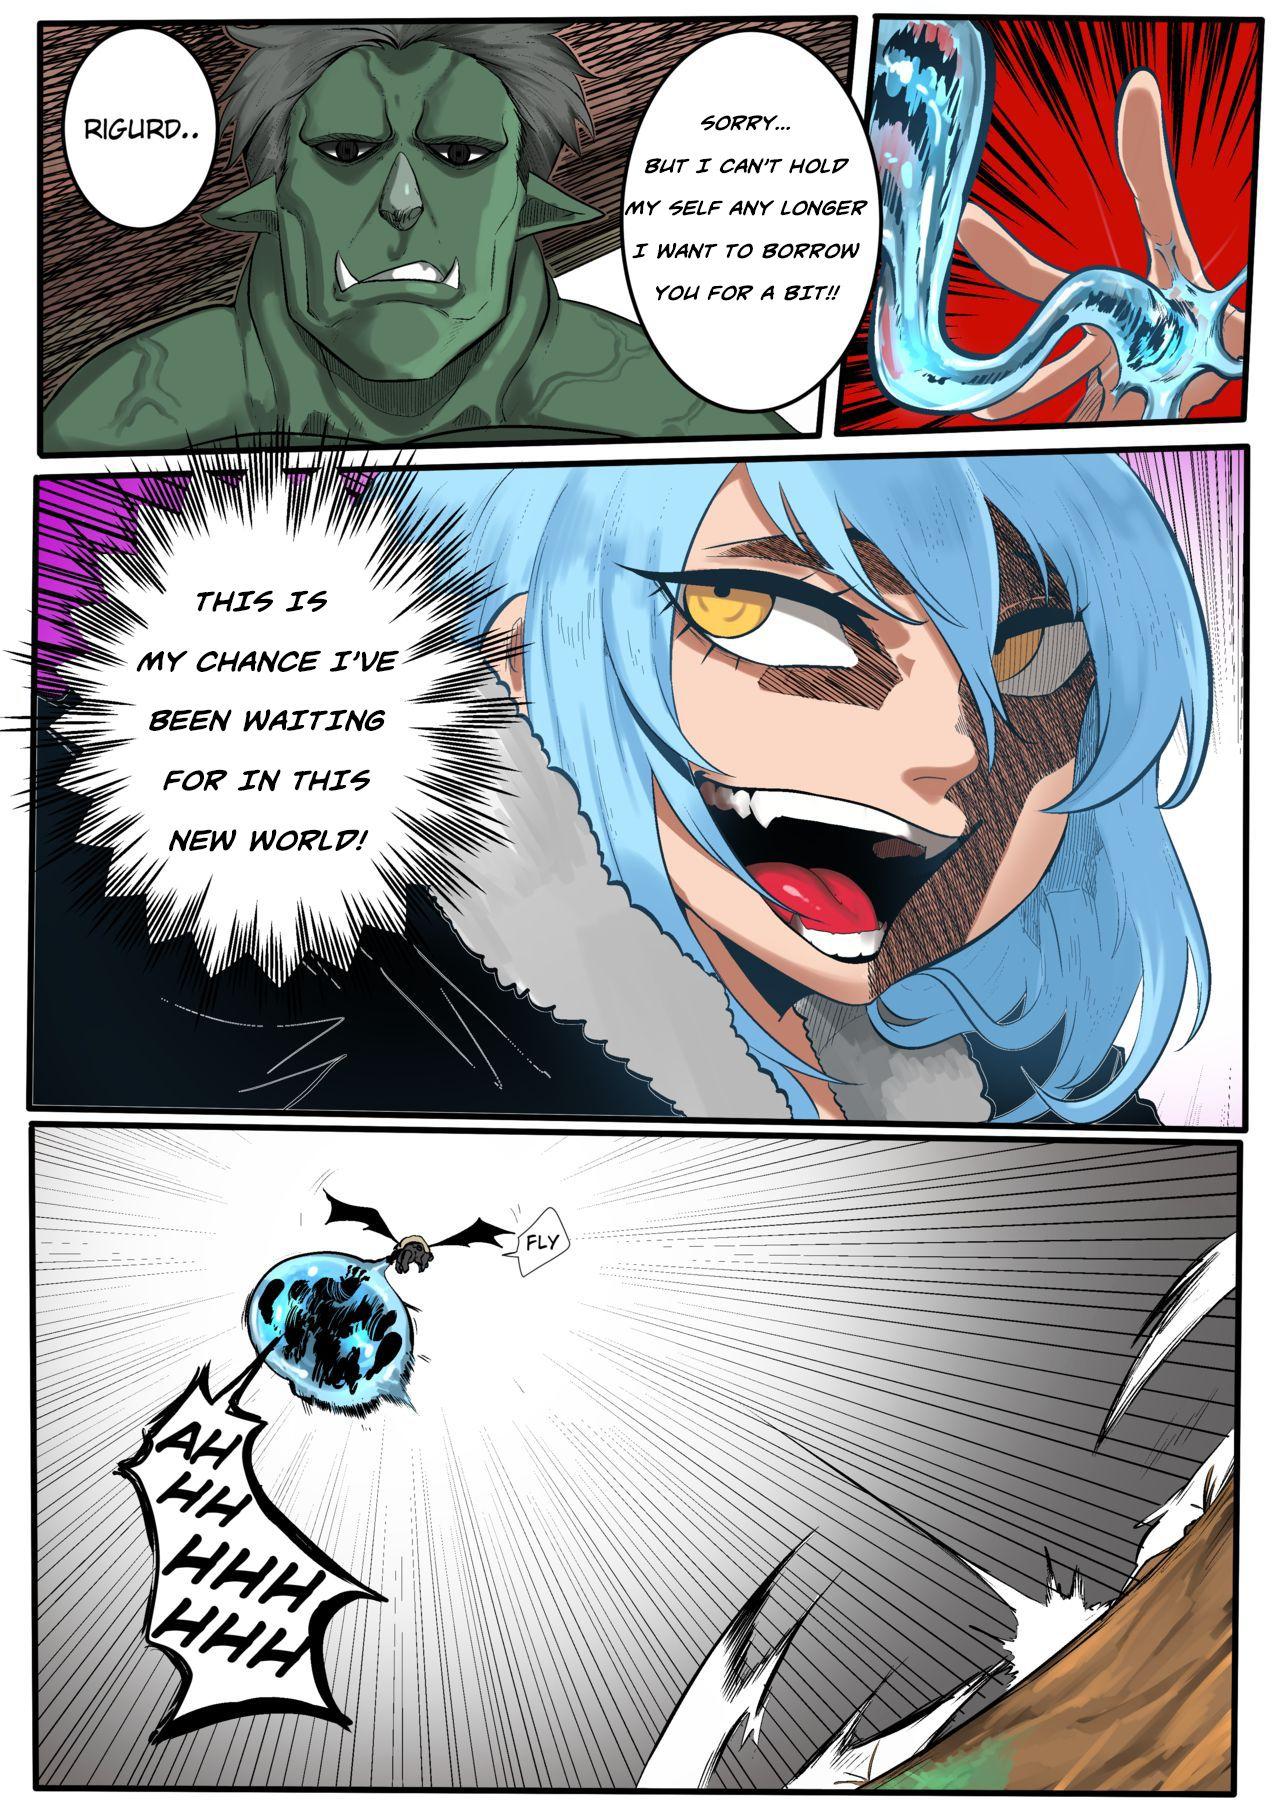 Hairy Pussy That Time I Got Reincarnated as a Bitchy Slime - Tensei shitara slime datta ken Onlyfans - Page 6